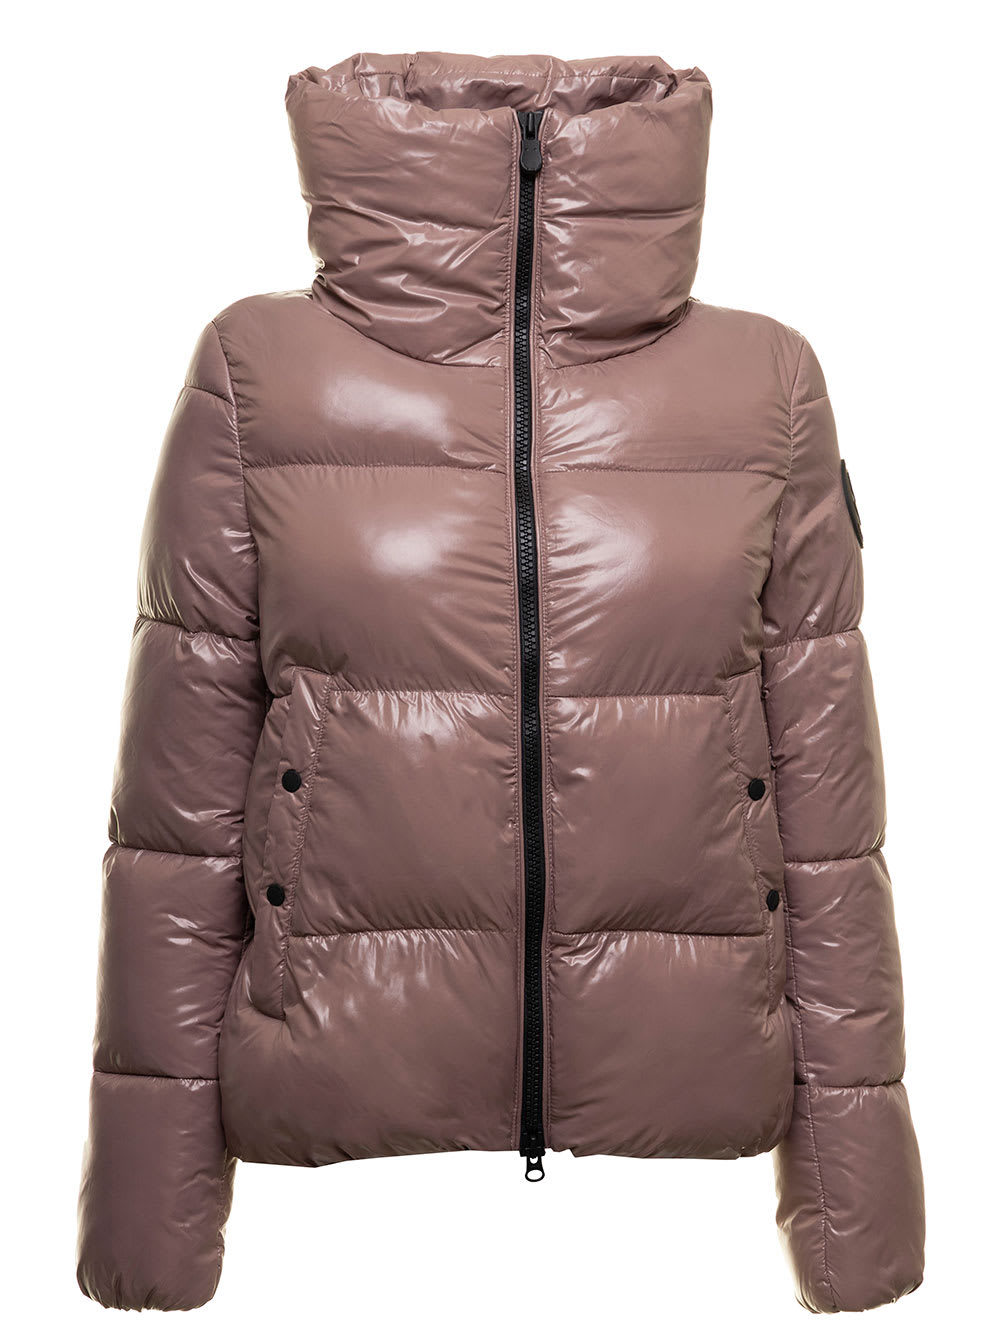 Isla Pink Down Jacket In Shiny Tech Fabric With Maxi Collar Save The Duck Woman